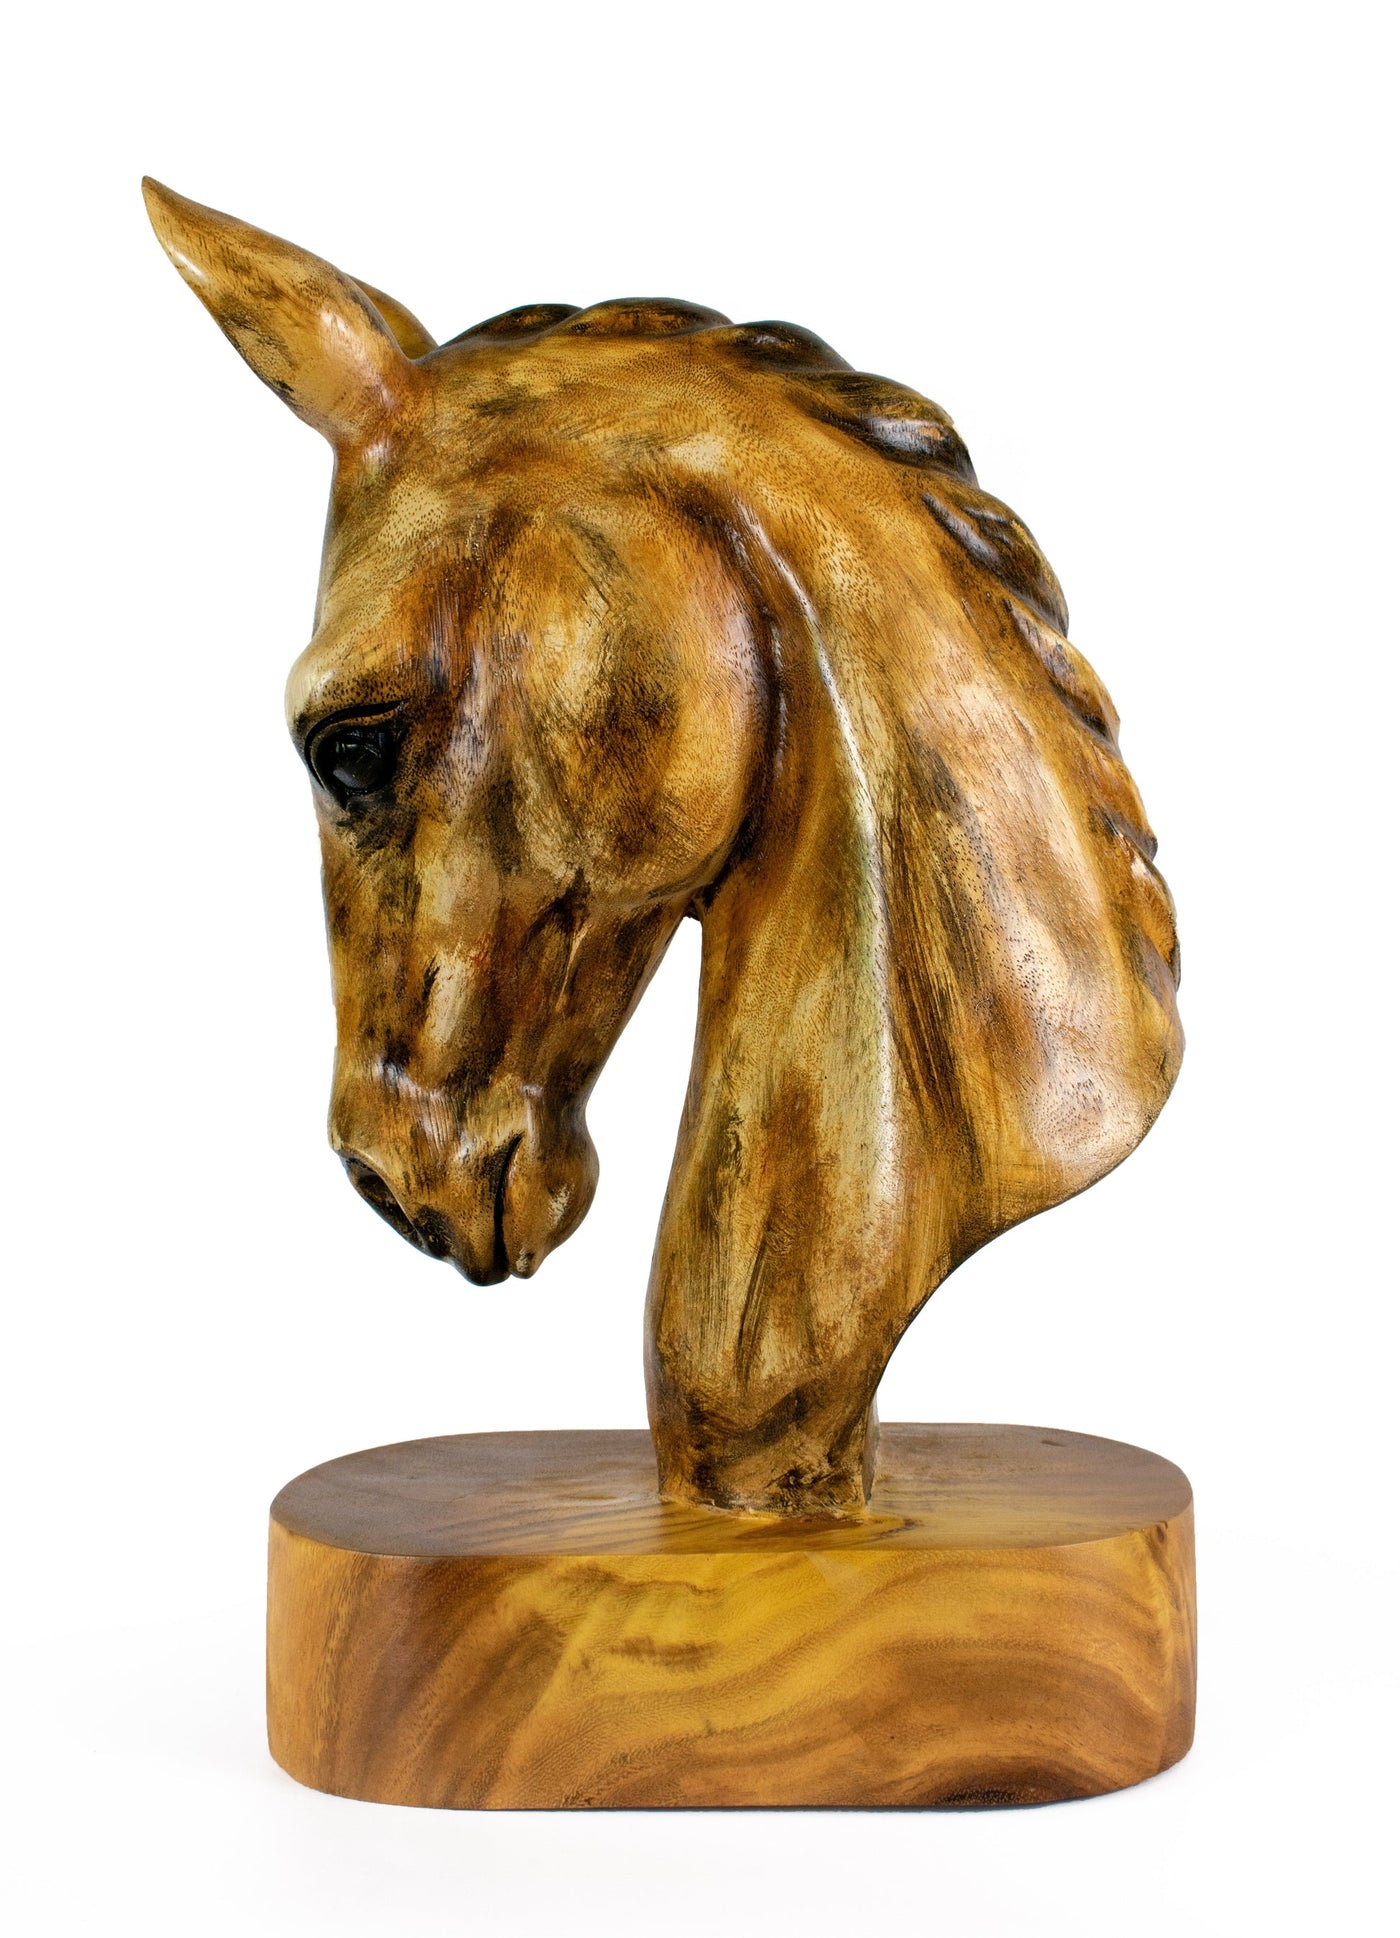 18" Solid Wood Hand Carved Horse Art Head Statue Sculpture Handcrafted Handmade Wooden Decorative Home Decor Accent Decoration Horse